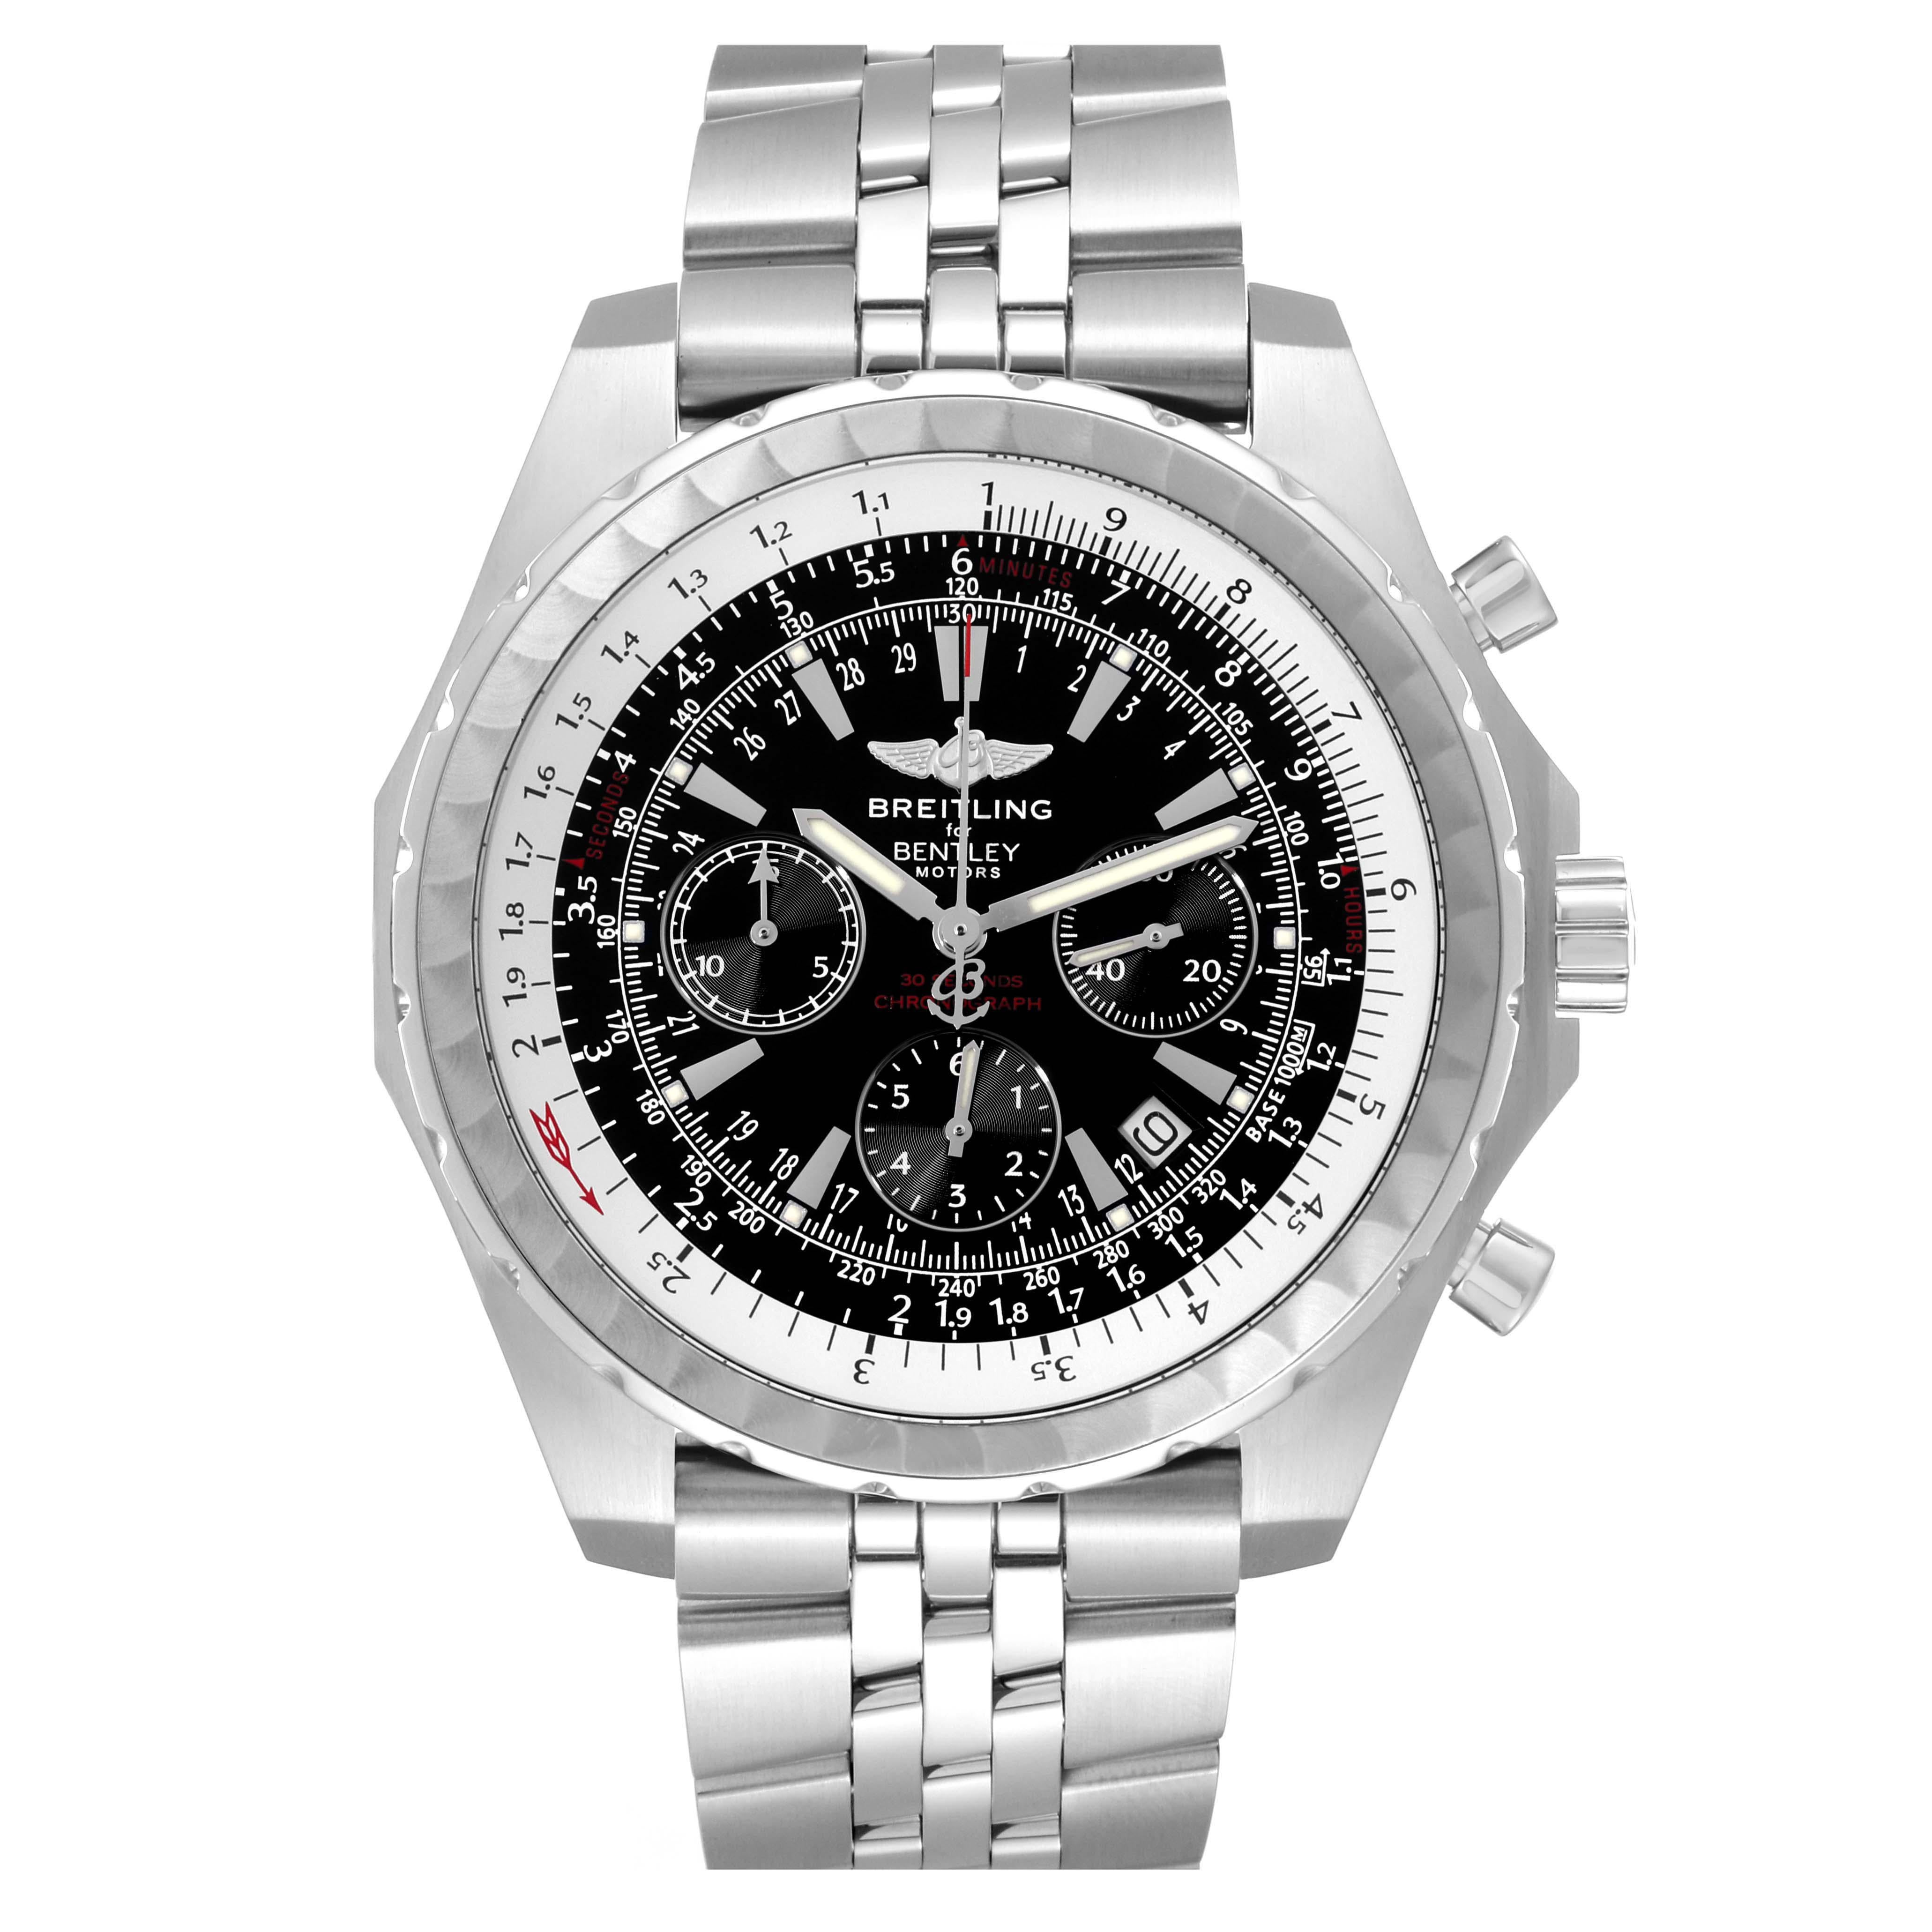 Breitling Bentley Motors T Black Dial Chronograph Mens Watch A25363. Self-winding automatic officially certified chronometer movement. Chronograph function. Stainless steel case 48.7 mm in diameter. Stainless steel screwed-down crown and pushers.